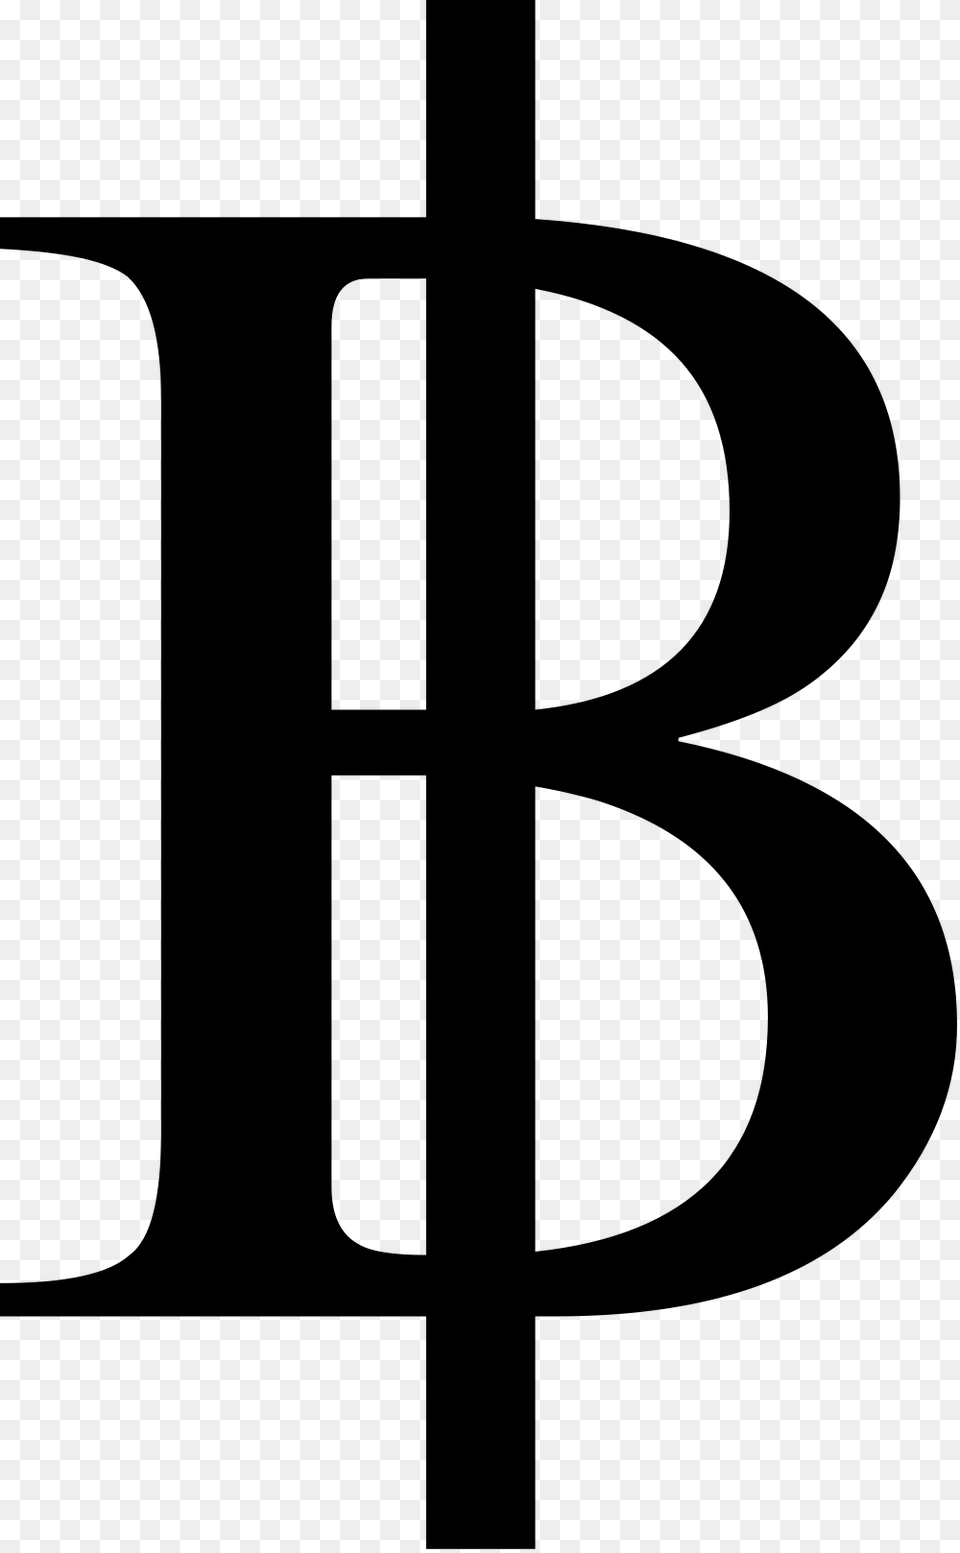 Thai Currency Symbol Baht, Gray Png Image